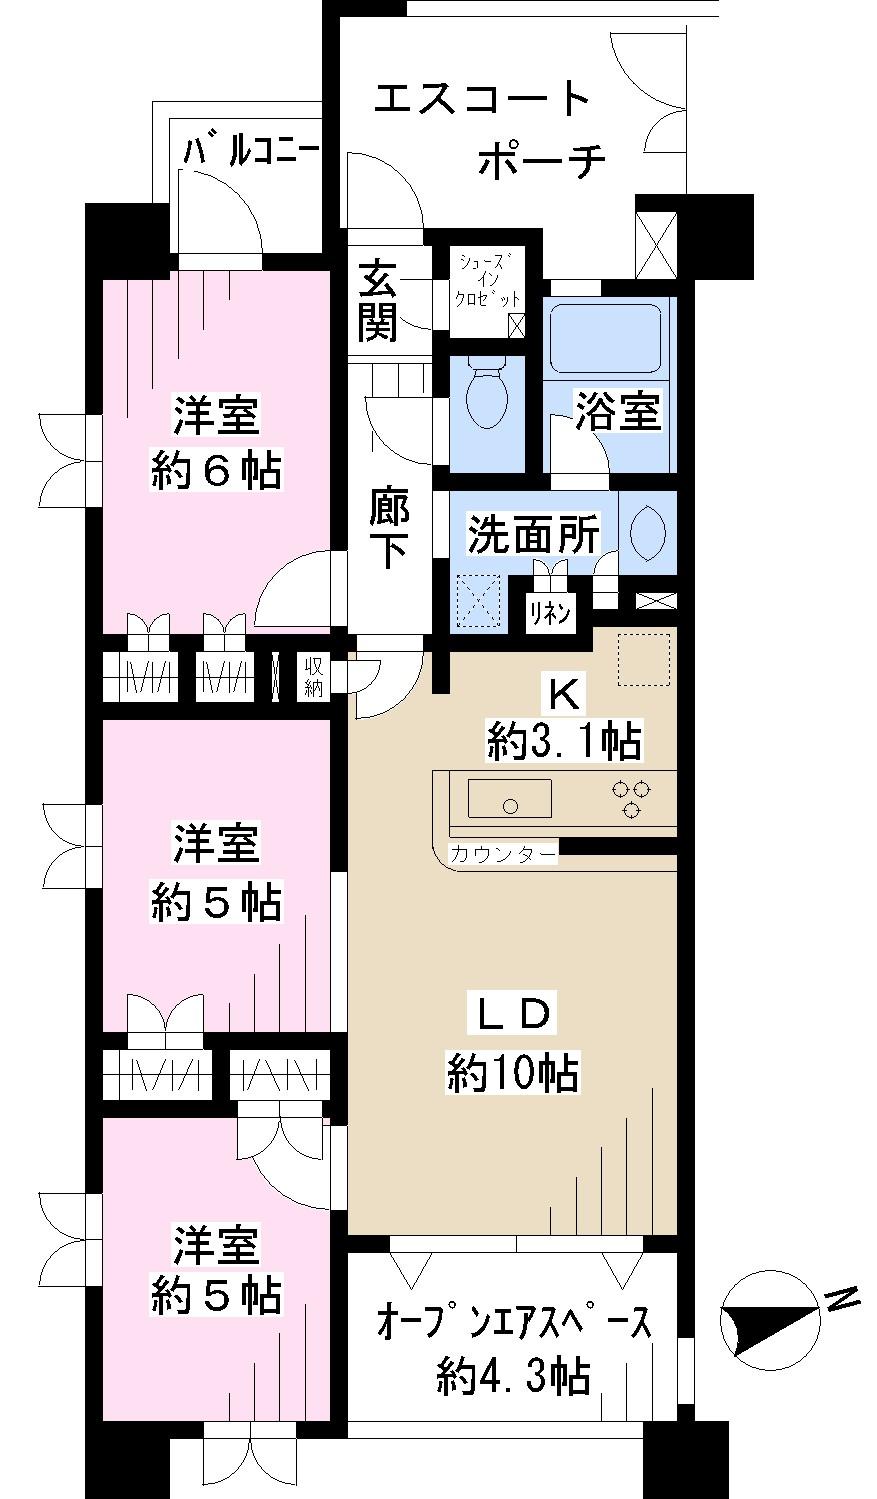 Floor plan. 3LDK, Price 27,700,000 yen, Occupied area 63.86 sq m , Day there is a window on the south side good on the balcony area 9.27 sq m 3 one of the Western-style!